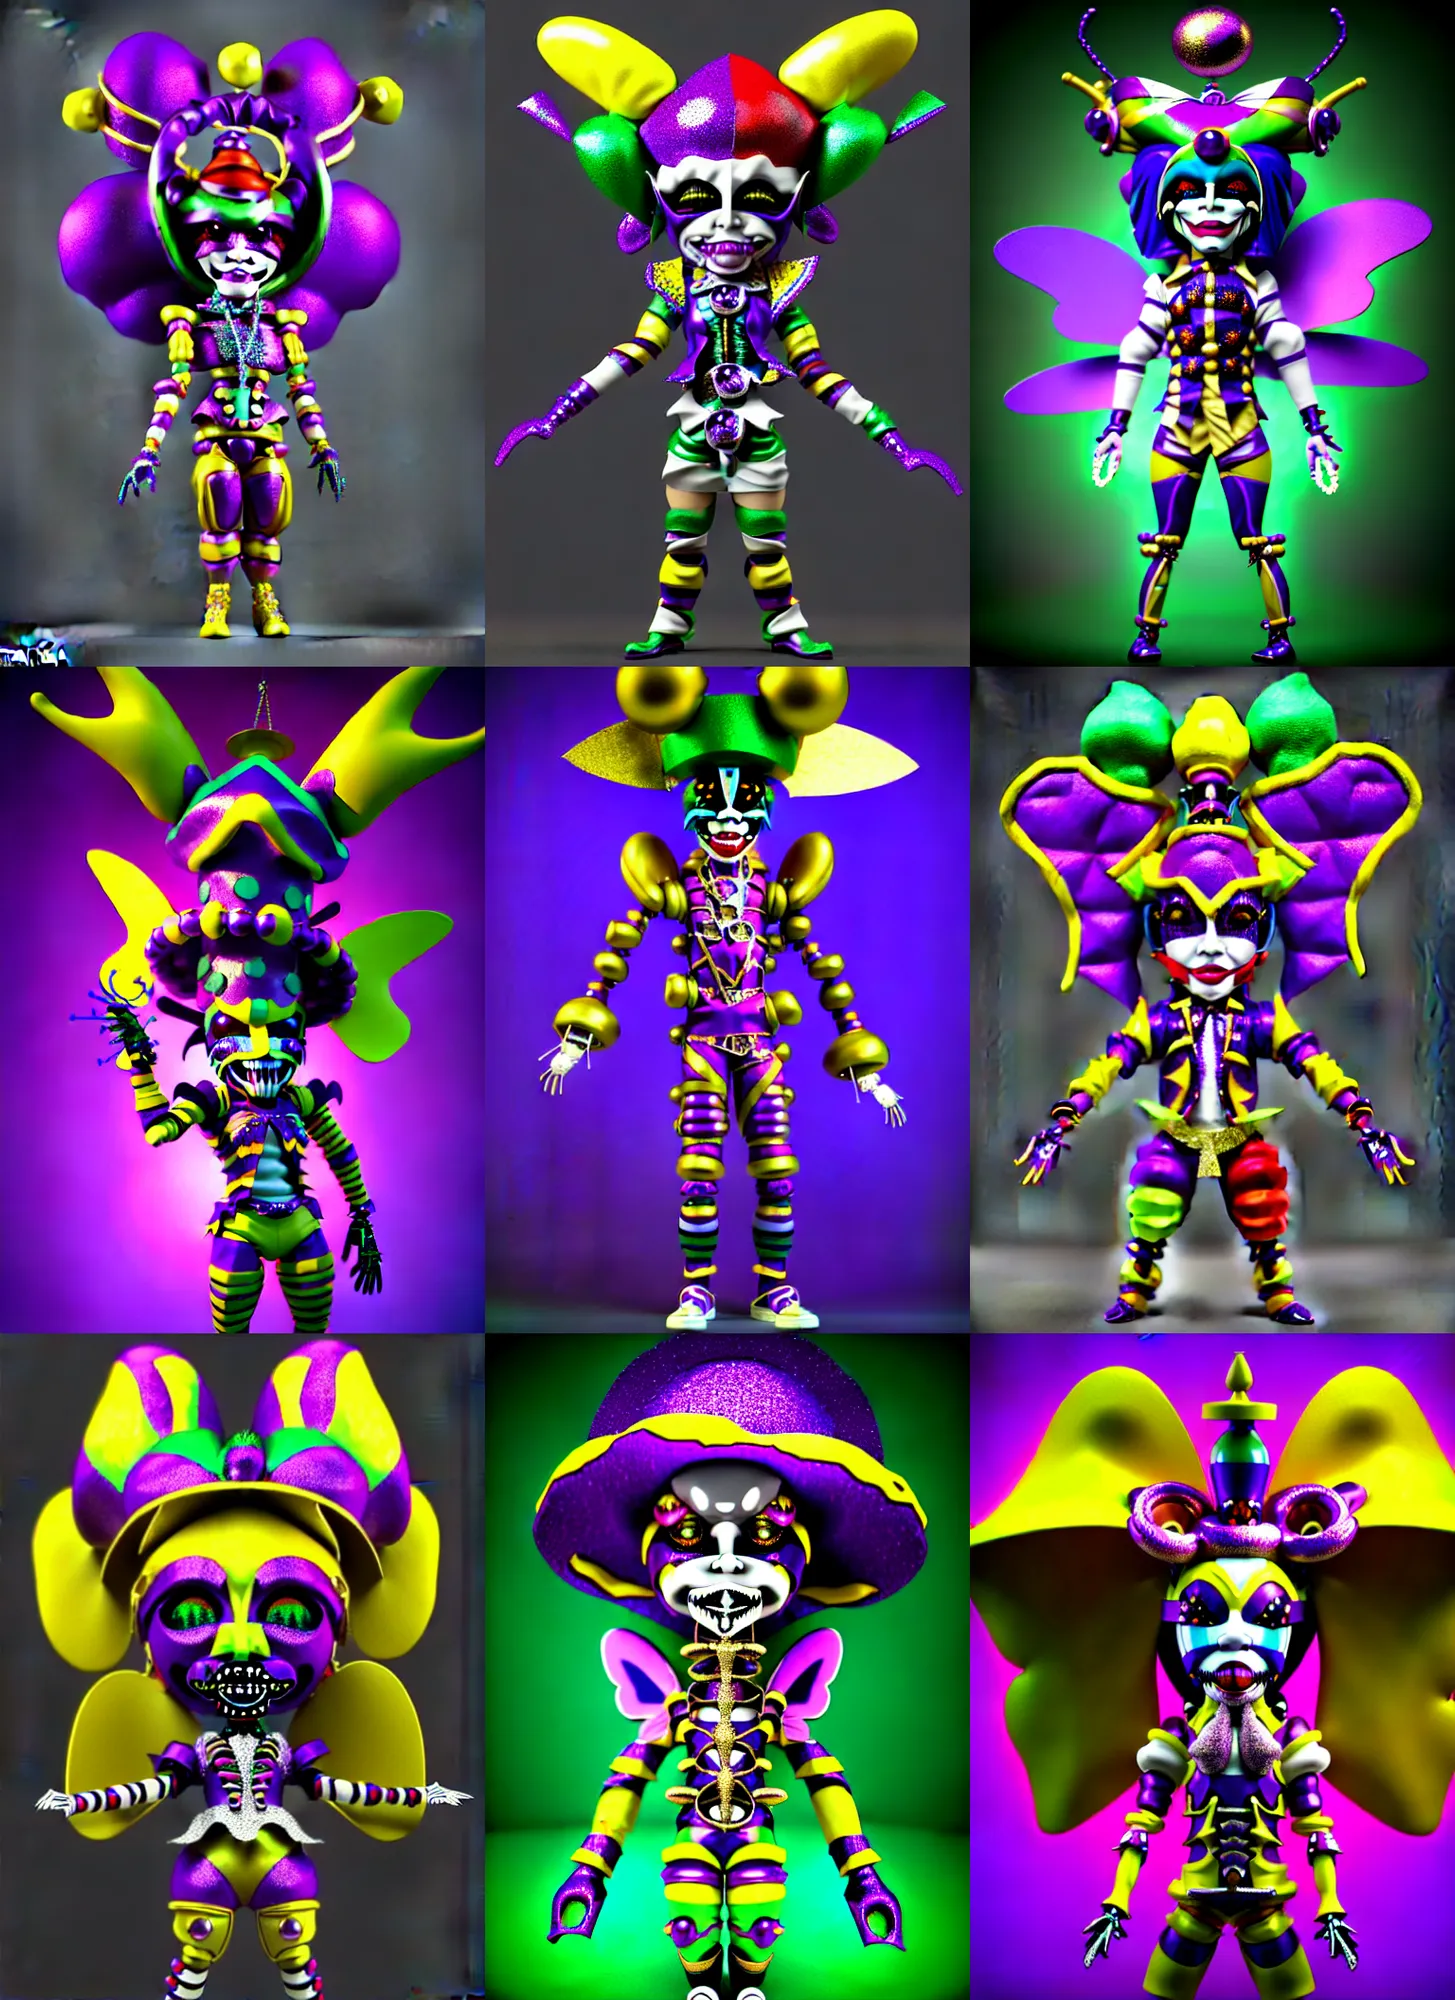 Prompt: 3d render of chibi Nightmaren cyborg Mardi Gras jester harlequin doll' by Ichiro Tanida wearing a 'jester cap and bells cockscomb cap' and wearing angel wings against a psychedelic swirly background with 3d butterflies and 3d flowers n the style of 1990's CG graphics 3d rendered y2K aesthetic by Ichiro Tanida, 3DO magazine